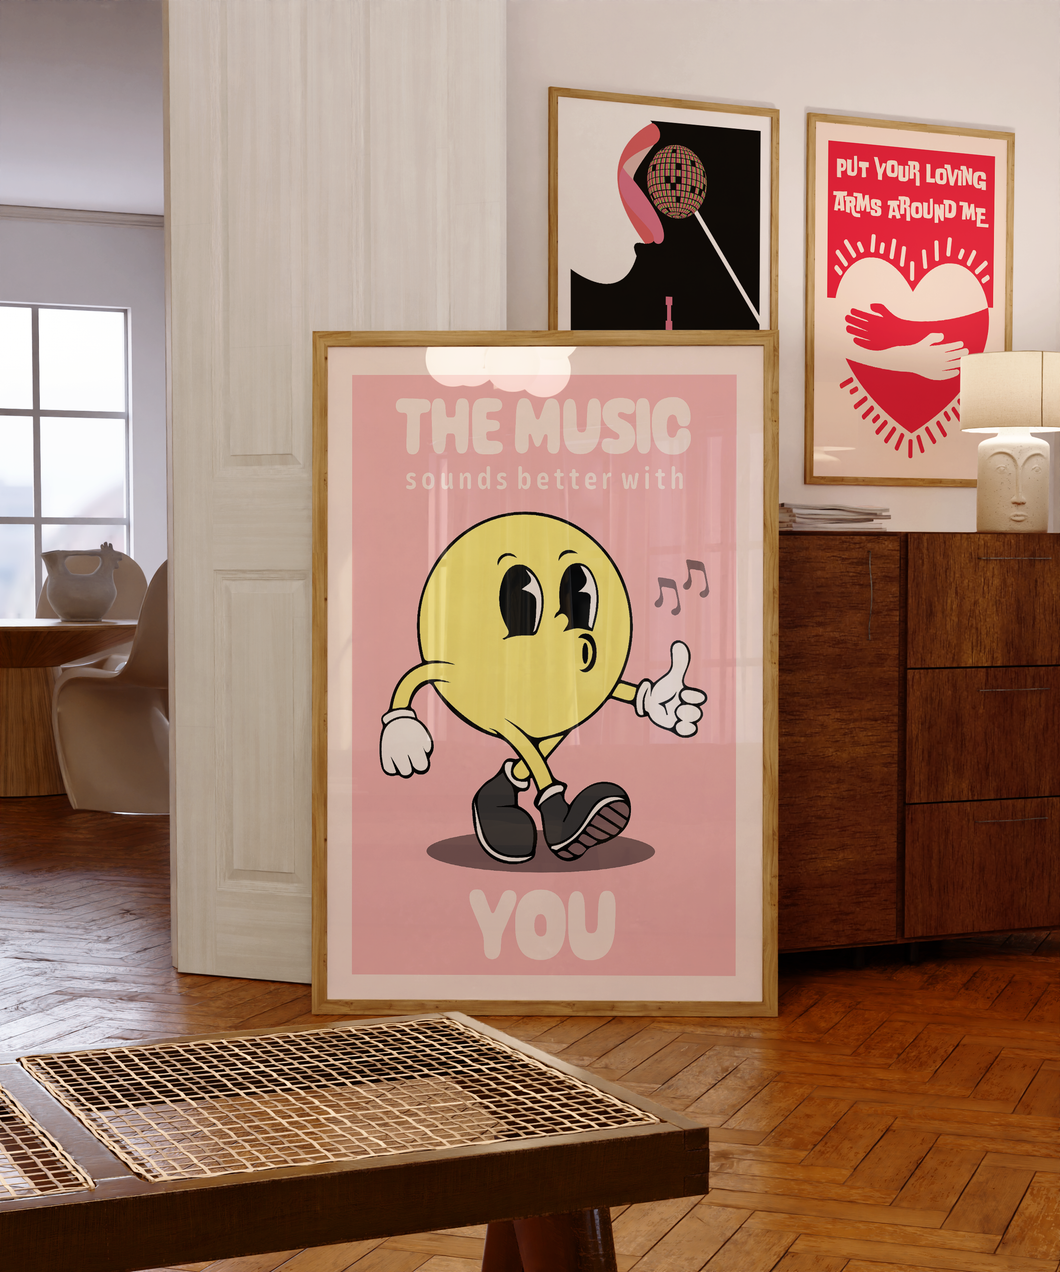 The Music Sounds Better With You Poster